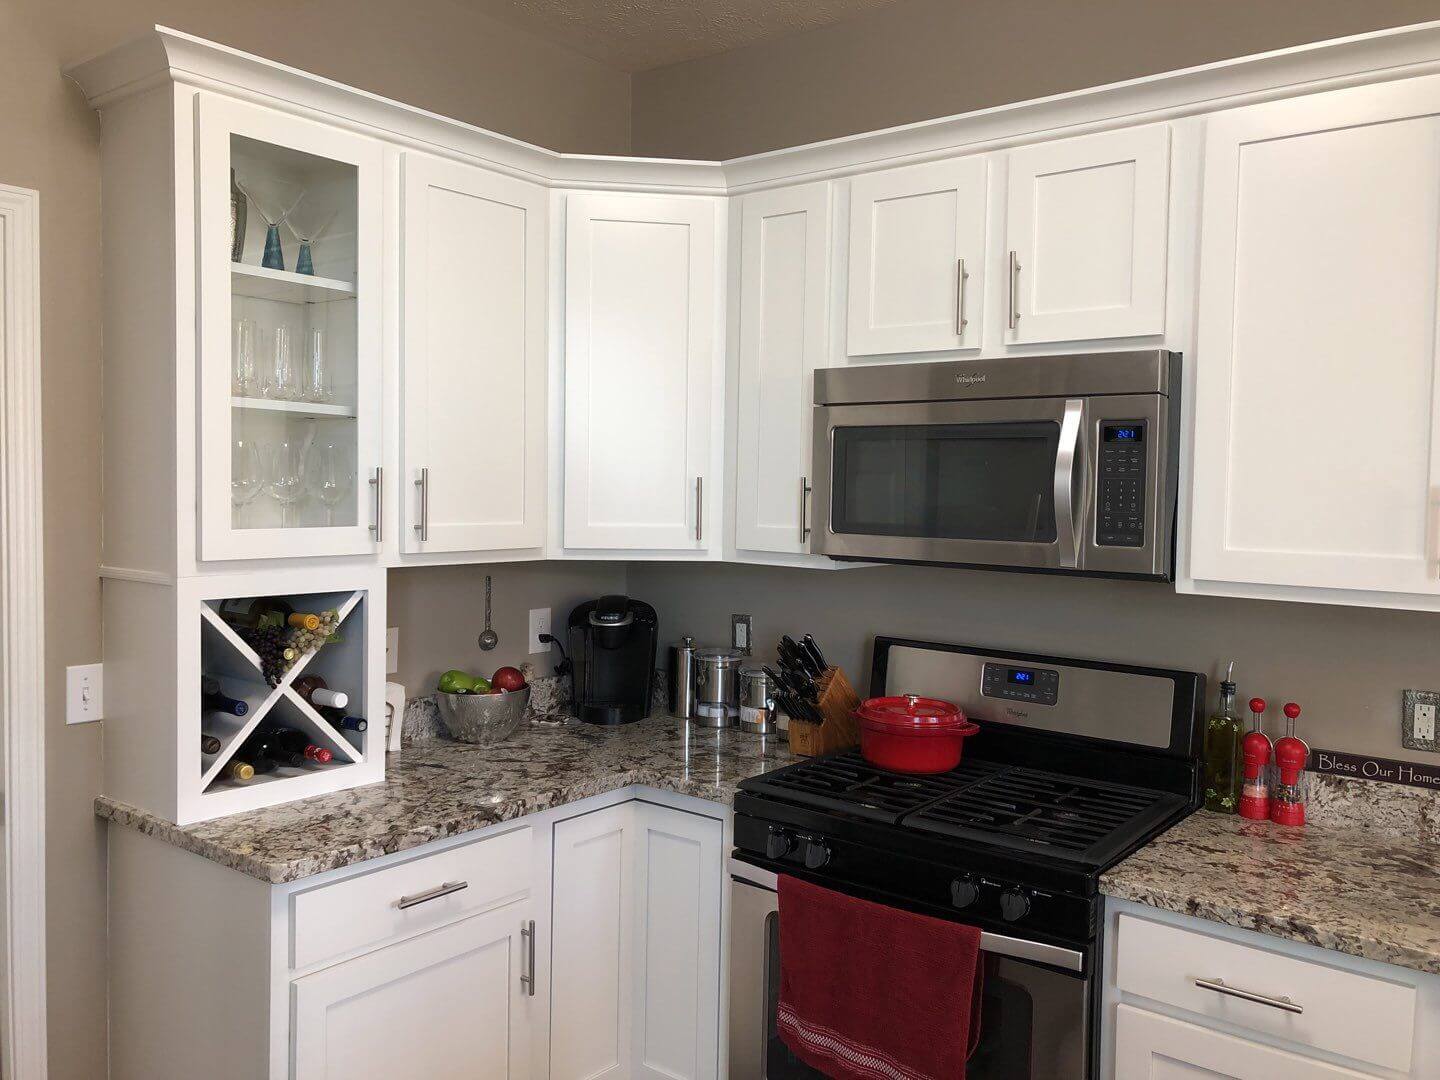 I Paint My Kitchen Cabinets, Painting Stained Cabinets White